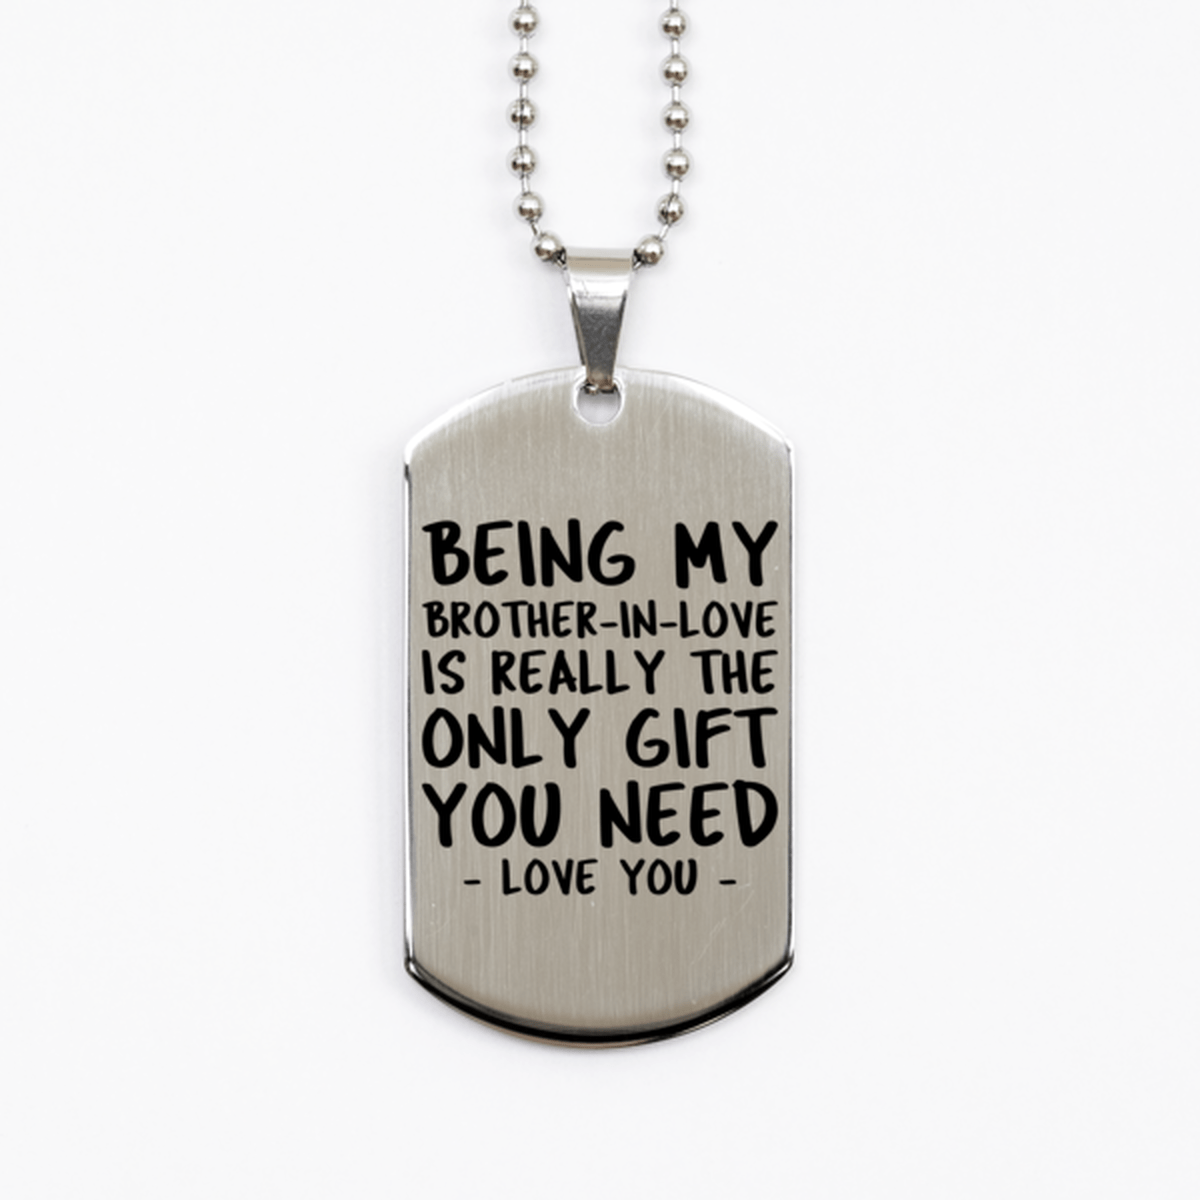 Funny Brother-in-love Silver Dog Tag Necklace, Being My Brother-in-love Is Really the Only Gift You Need, Best Birthday Gifts for Brother-in-love